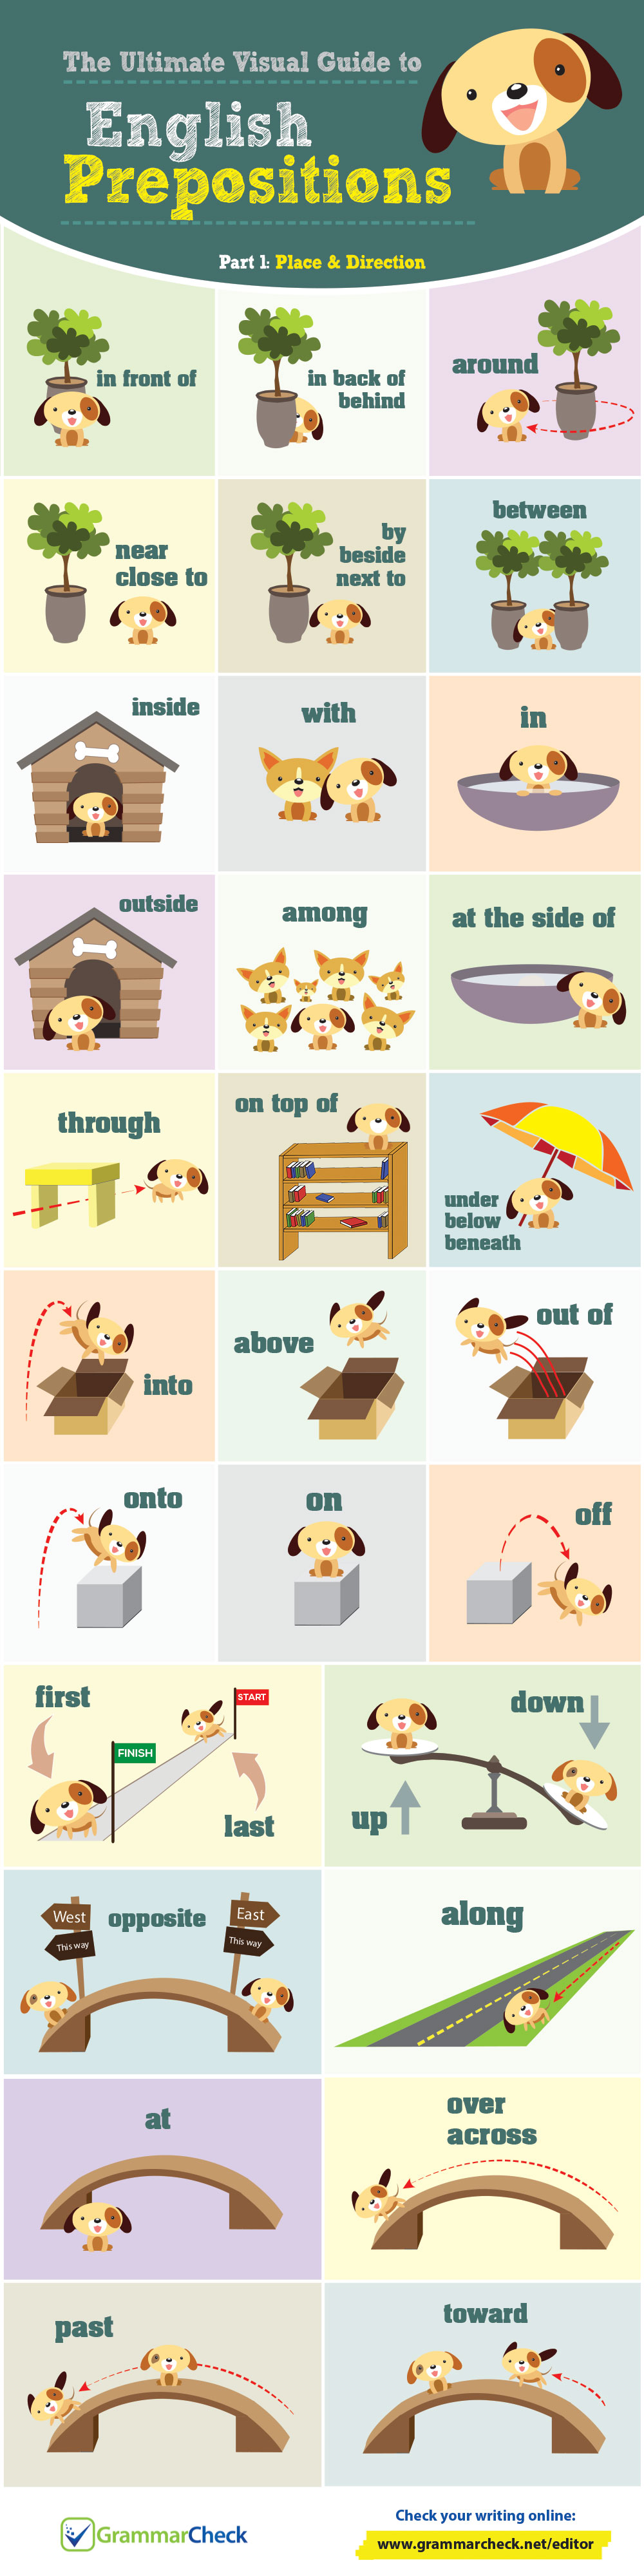 The Visual Guide to English Prepositions Part 1/2 (Infographic)